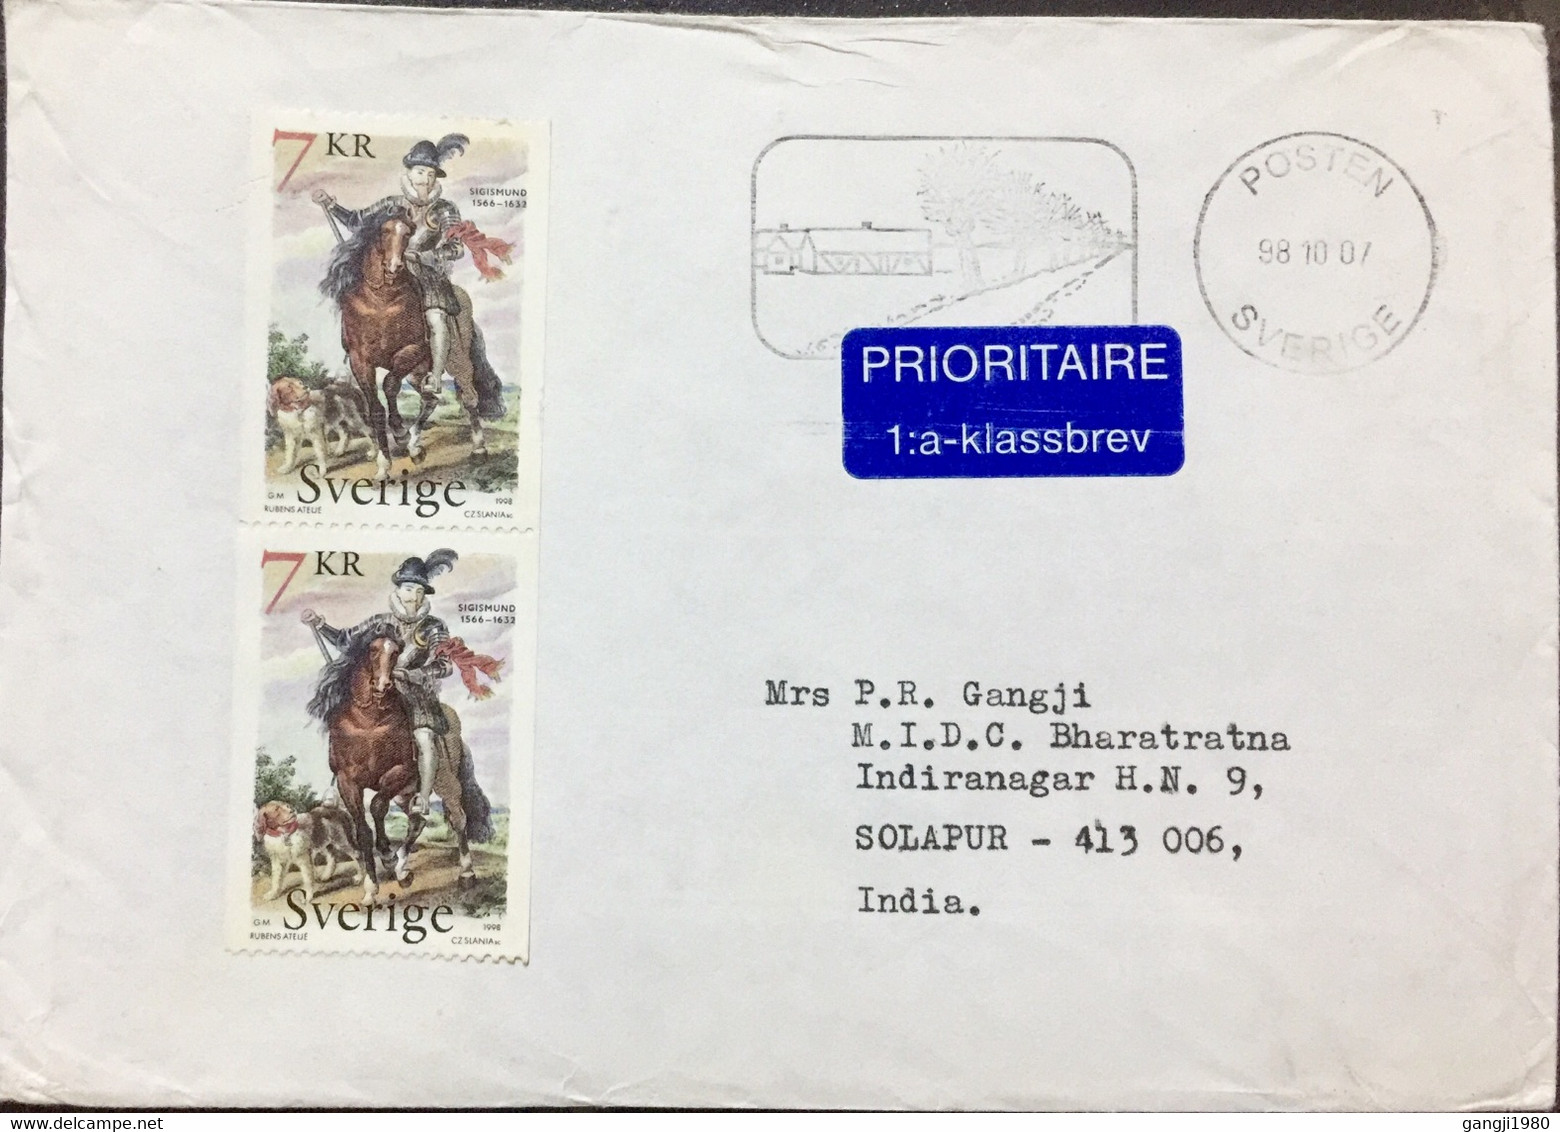 SWEDEN 2007, AIRMAIL COVER USED TO INDIA,POSTEN PICTURAL SLOGAN,CANCELLATION!!! SIGISMUND 1998 STAMPS PAIR - Storia Postale